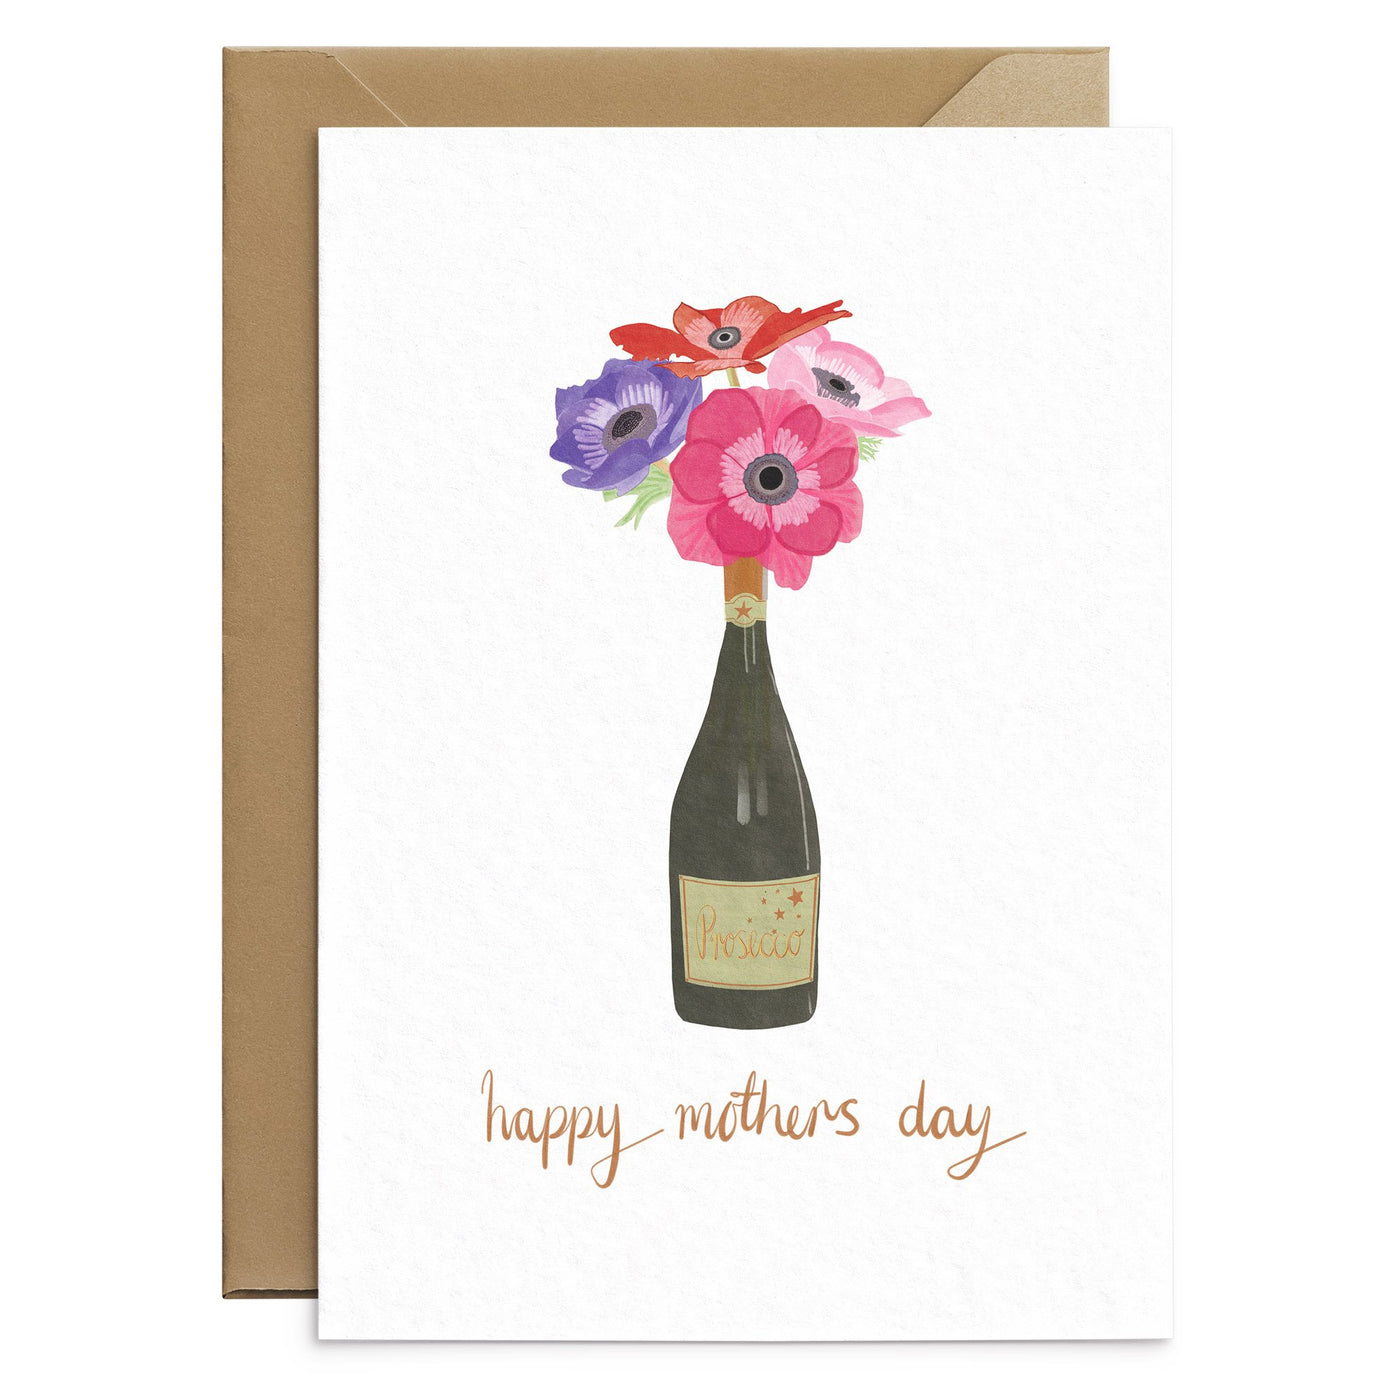 Mothers Day Prosecco Card - Poppins & Co.